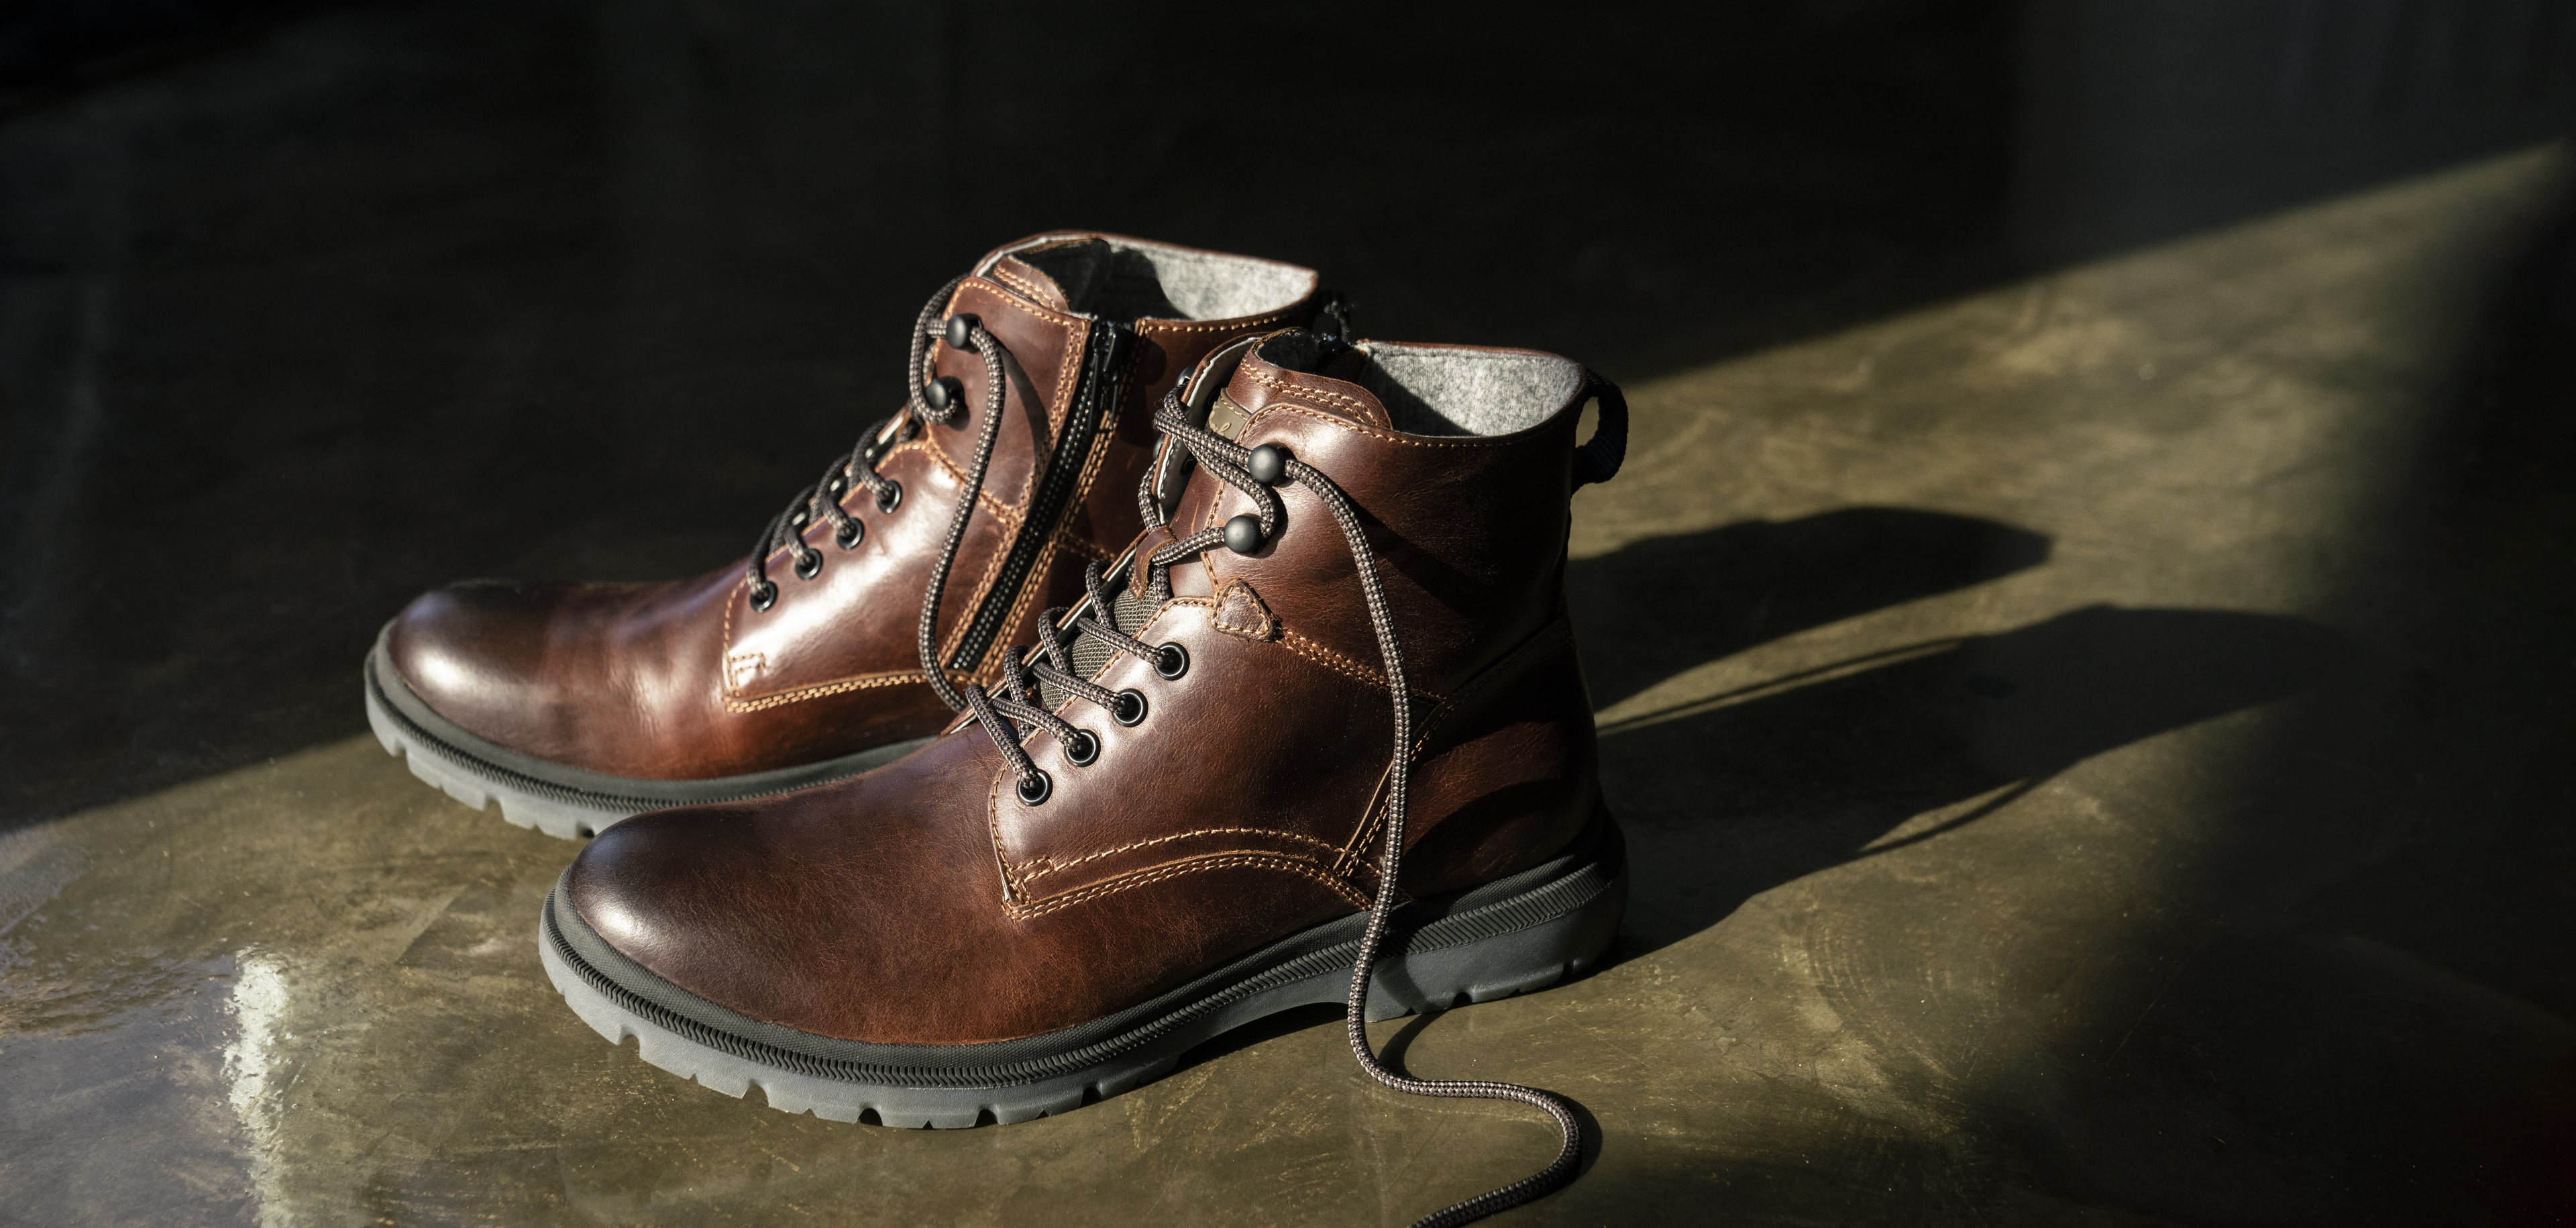 Click to shop Florsheim new arrivals. Image features the Lookout boot in brown.